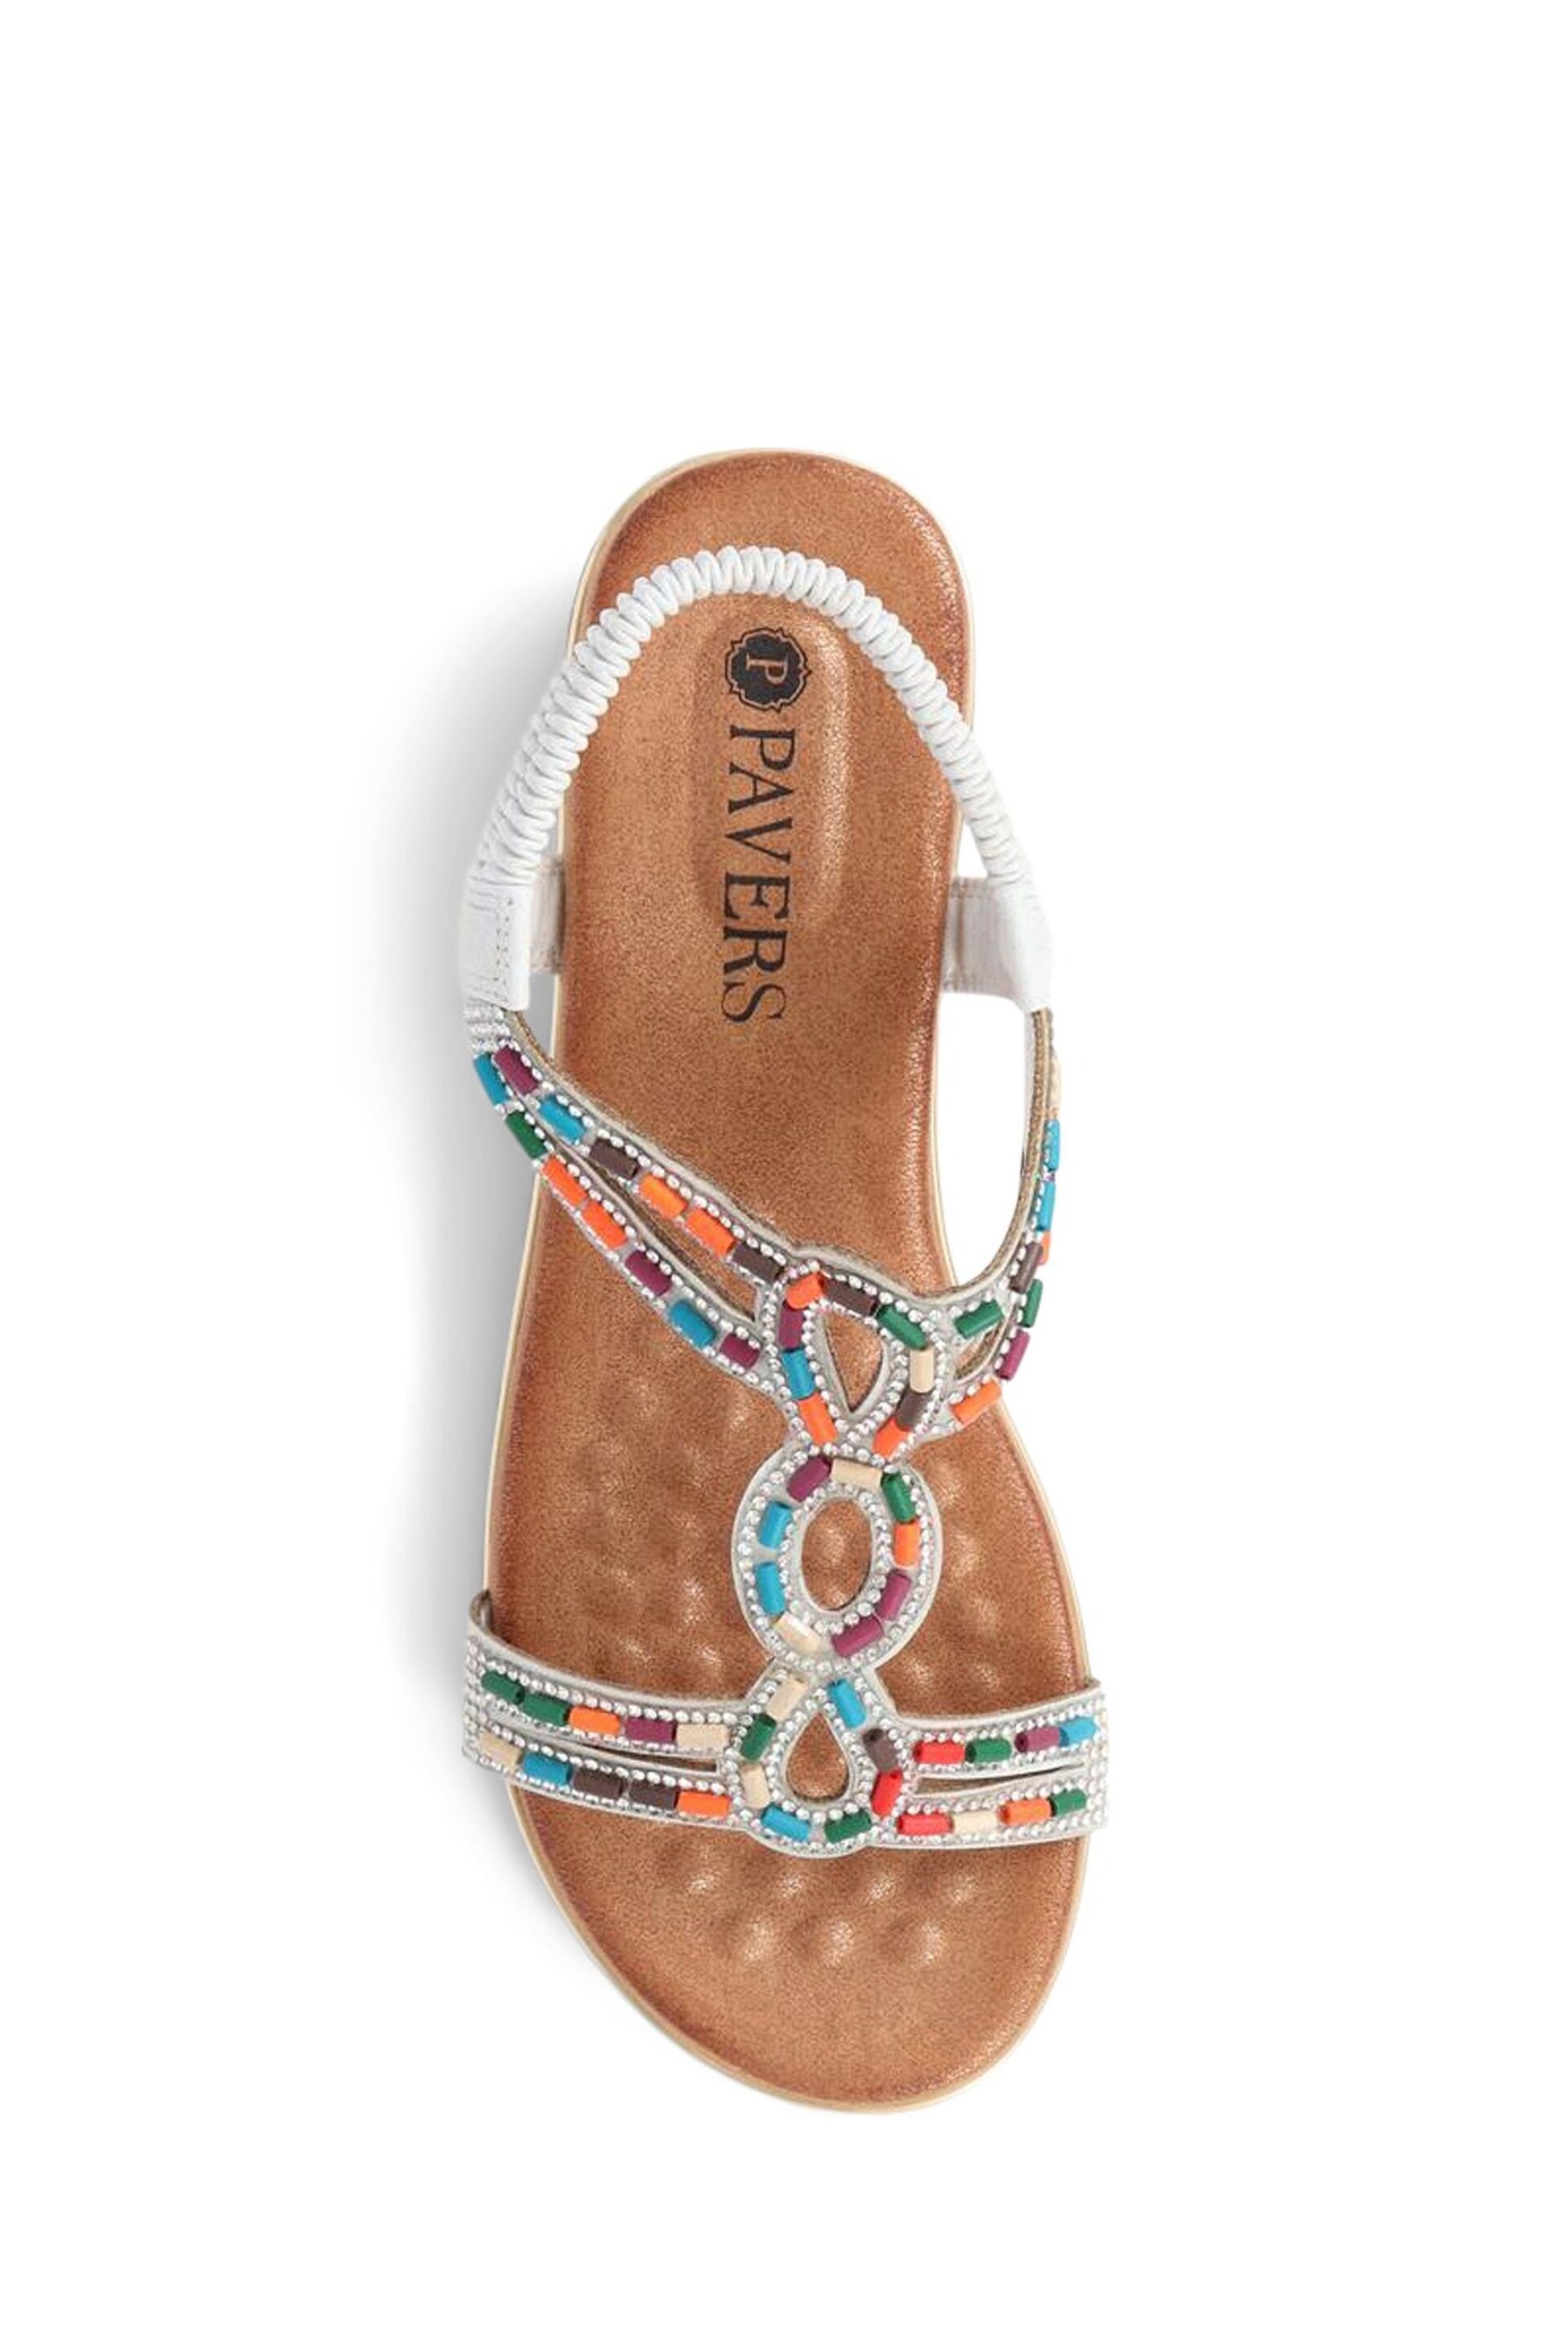 Pavers Beaded Sandals - Image 3 of 5